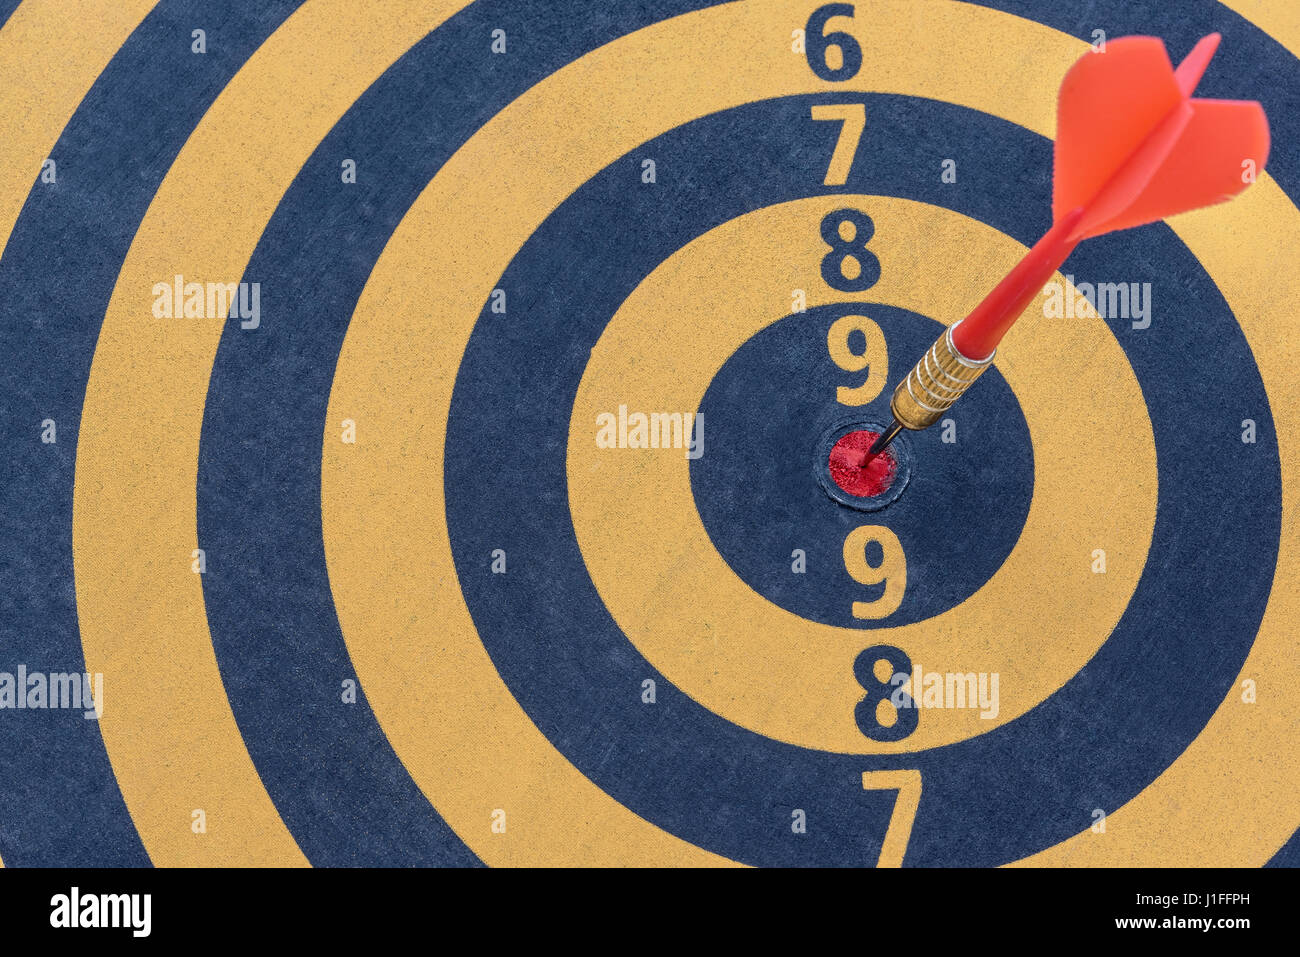 Dart target with arrow on bullseye, Goal target success business investment financial strategy concept, abstract background Stock Photo